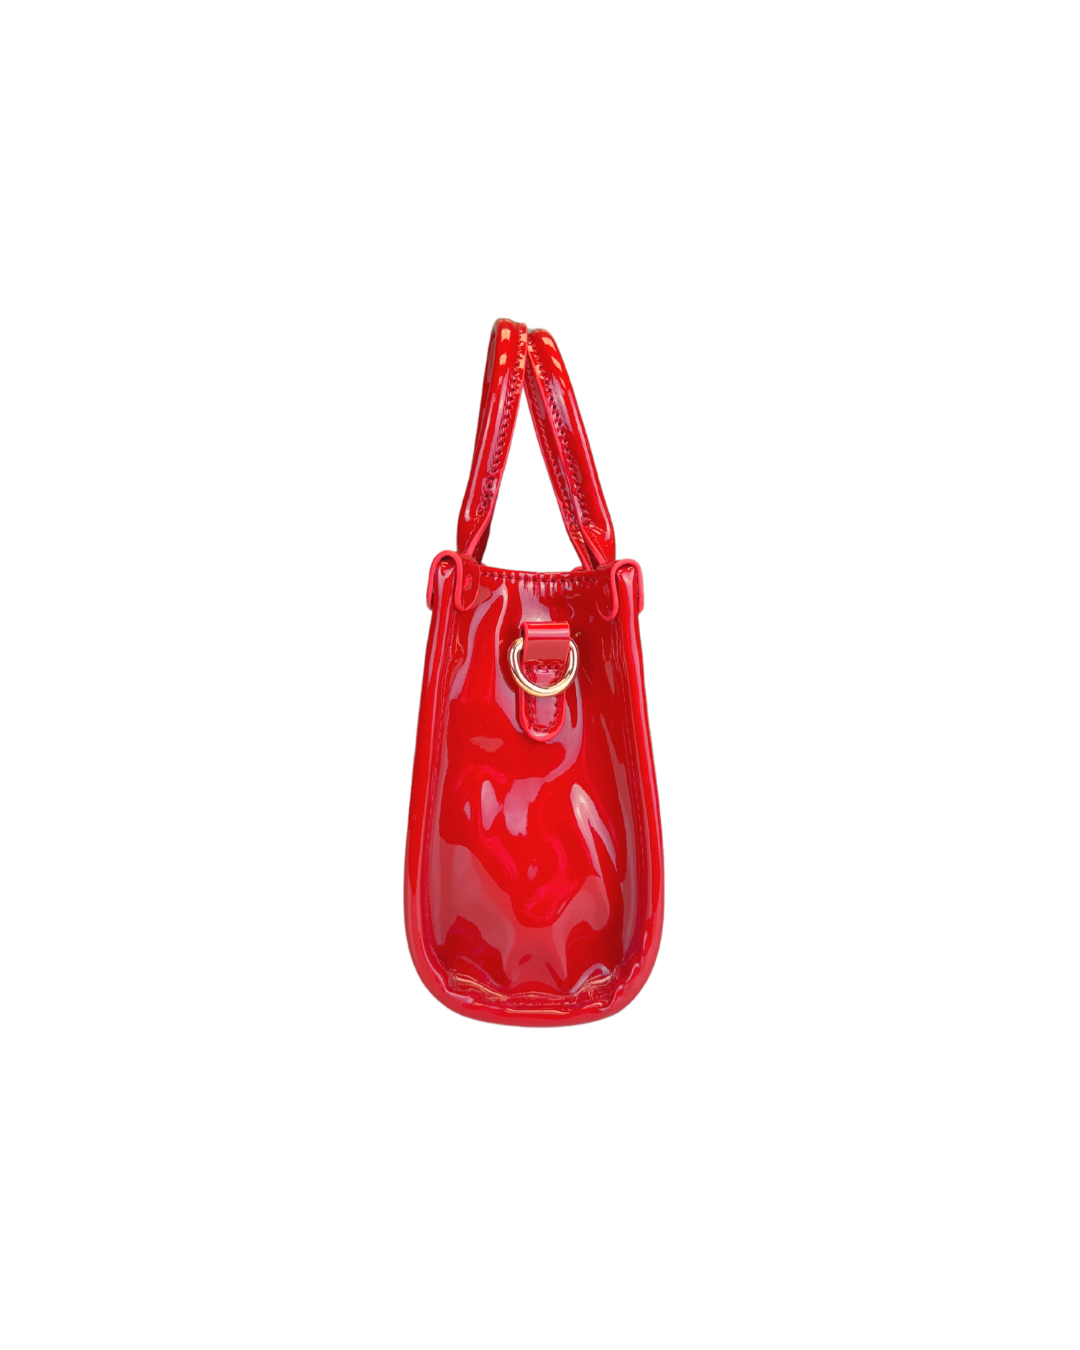 MICRO SHOPPER: CANDY RED